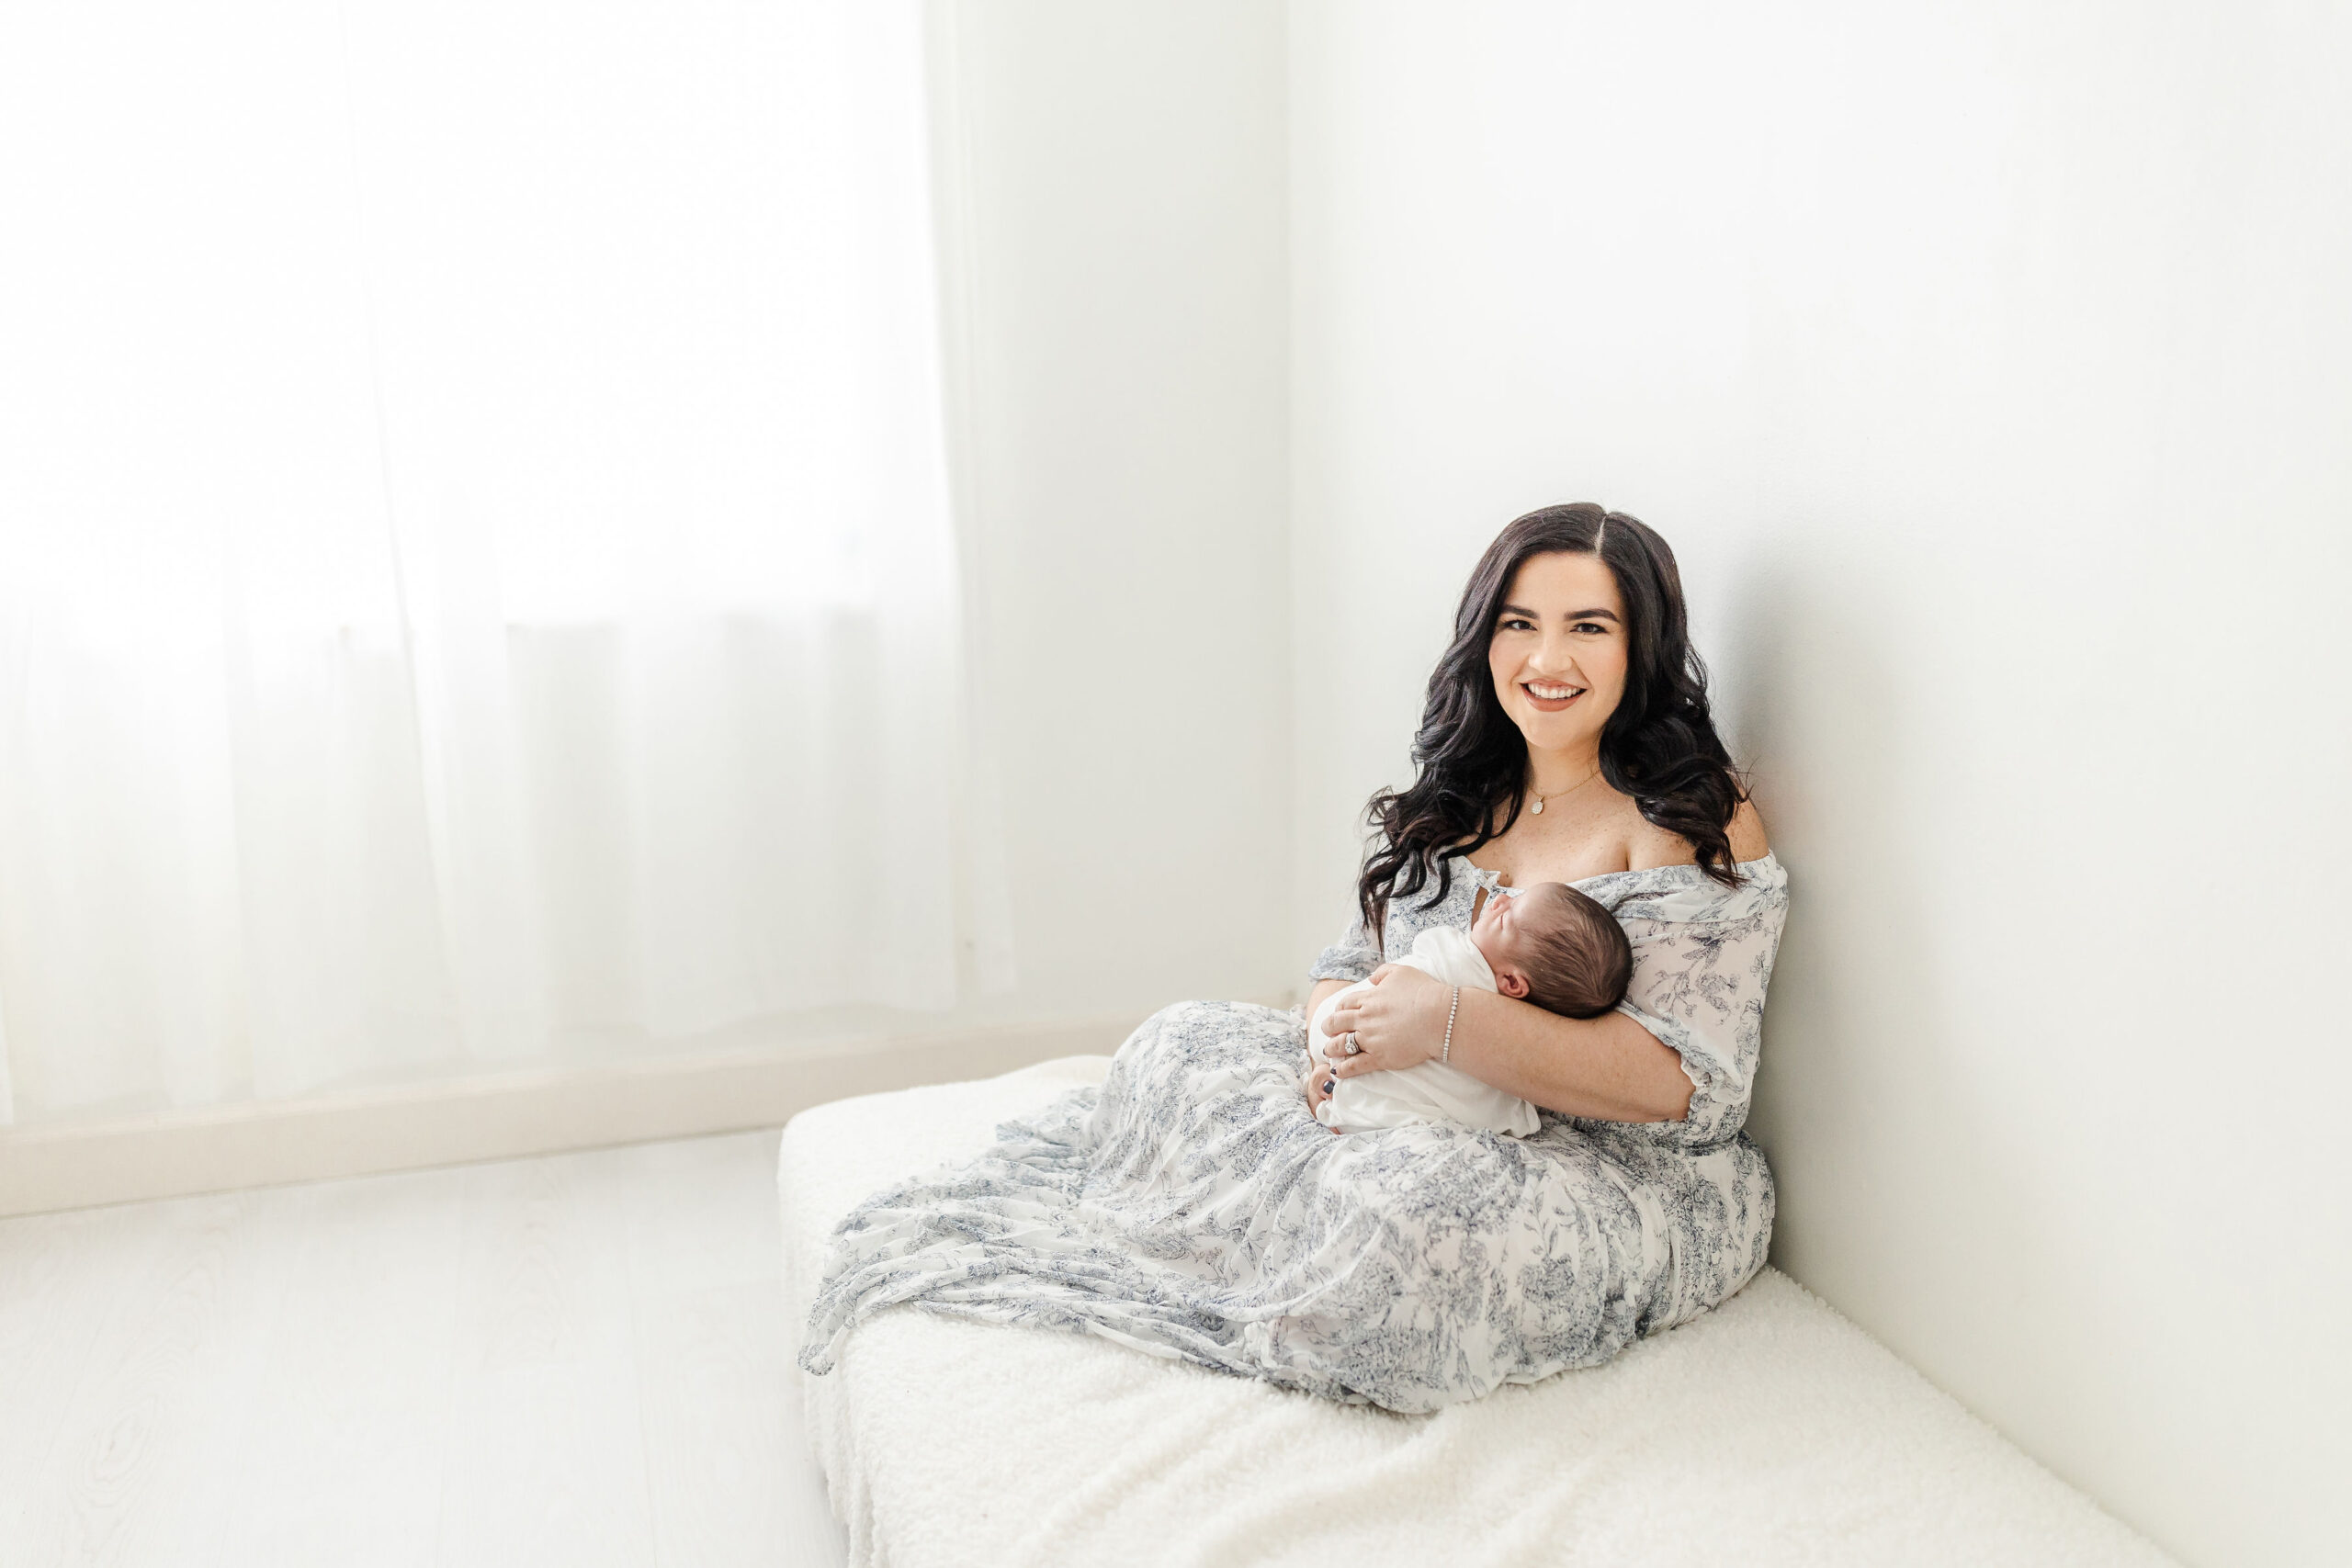 A new mom sits on a bed in a blue dress while holding her newborn baby in her lap by a window lumina massage